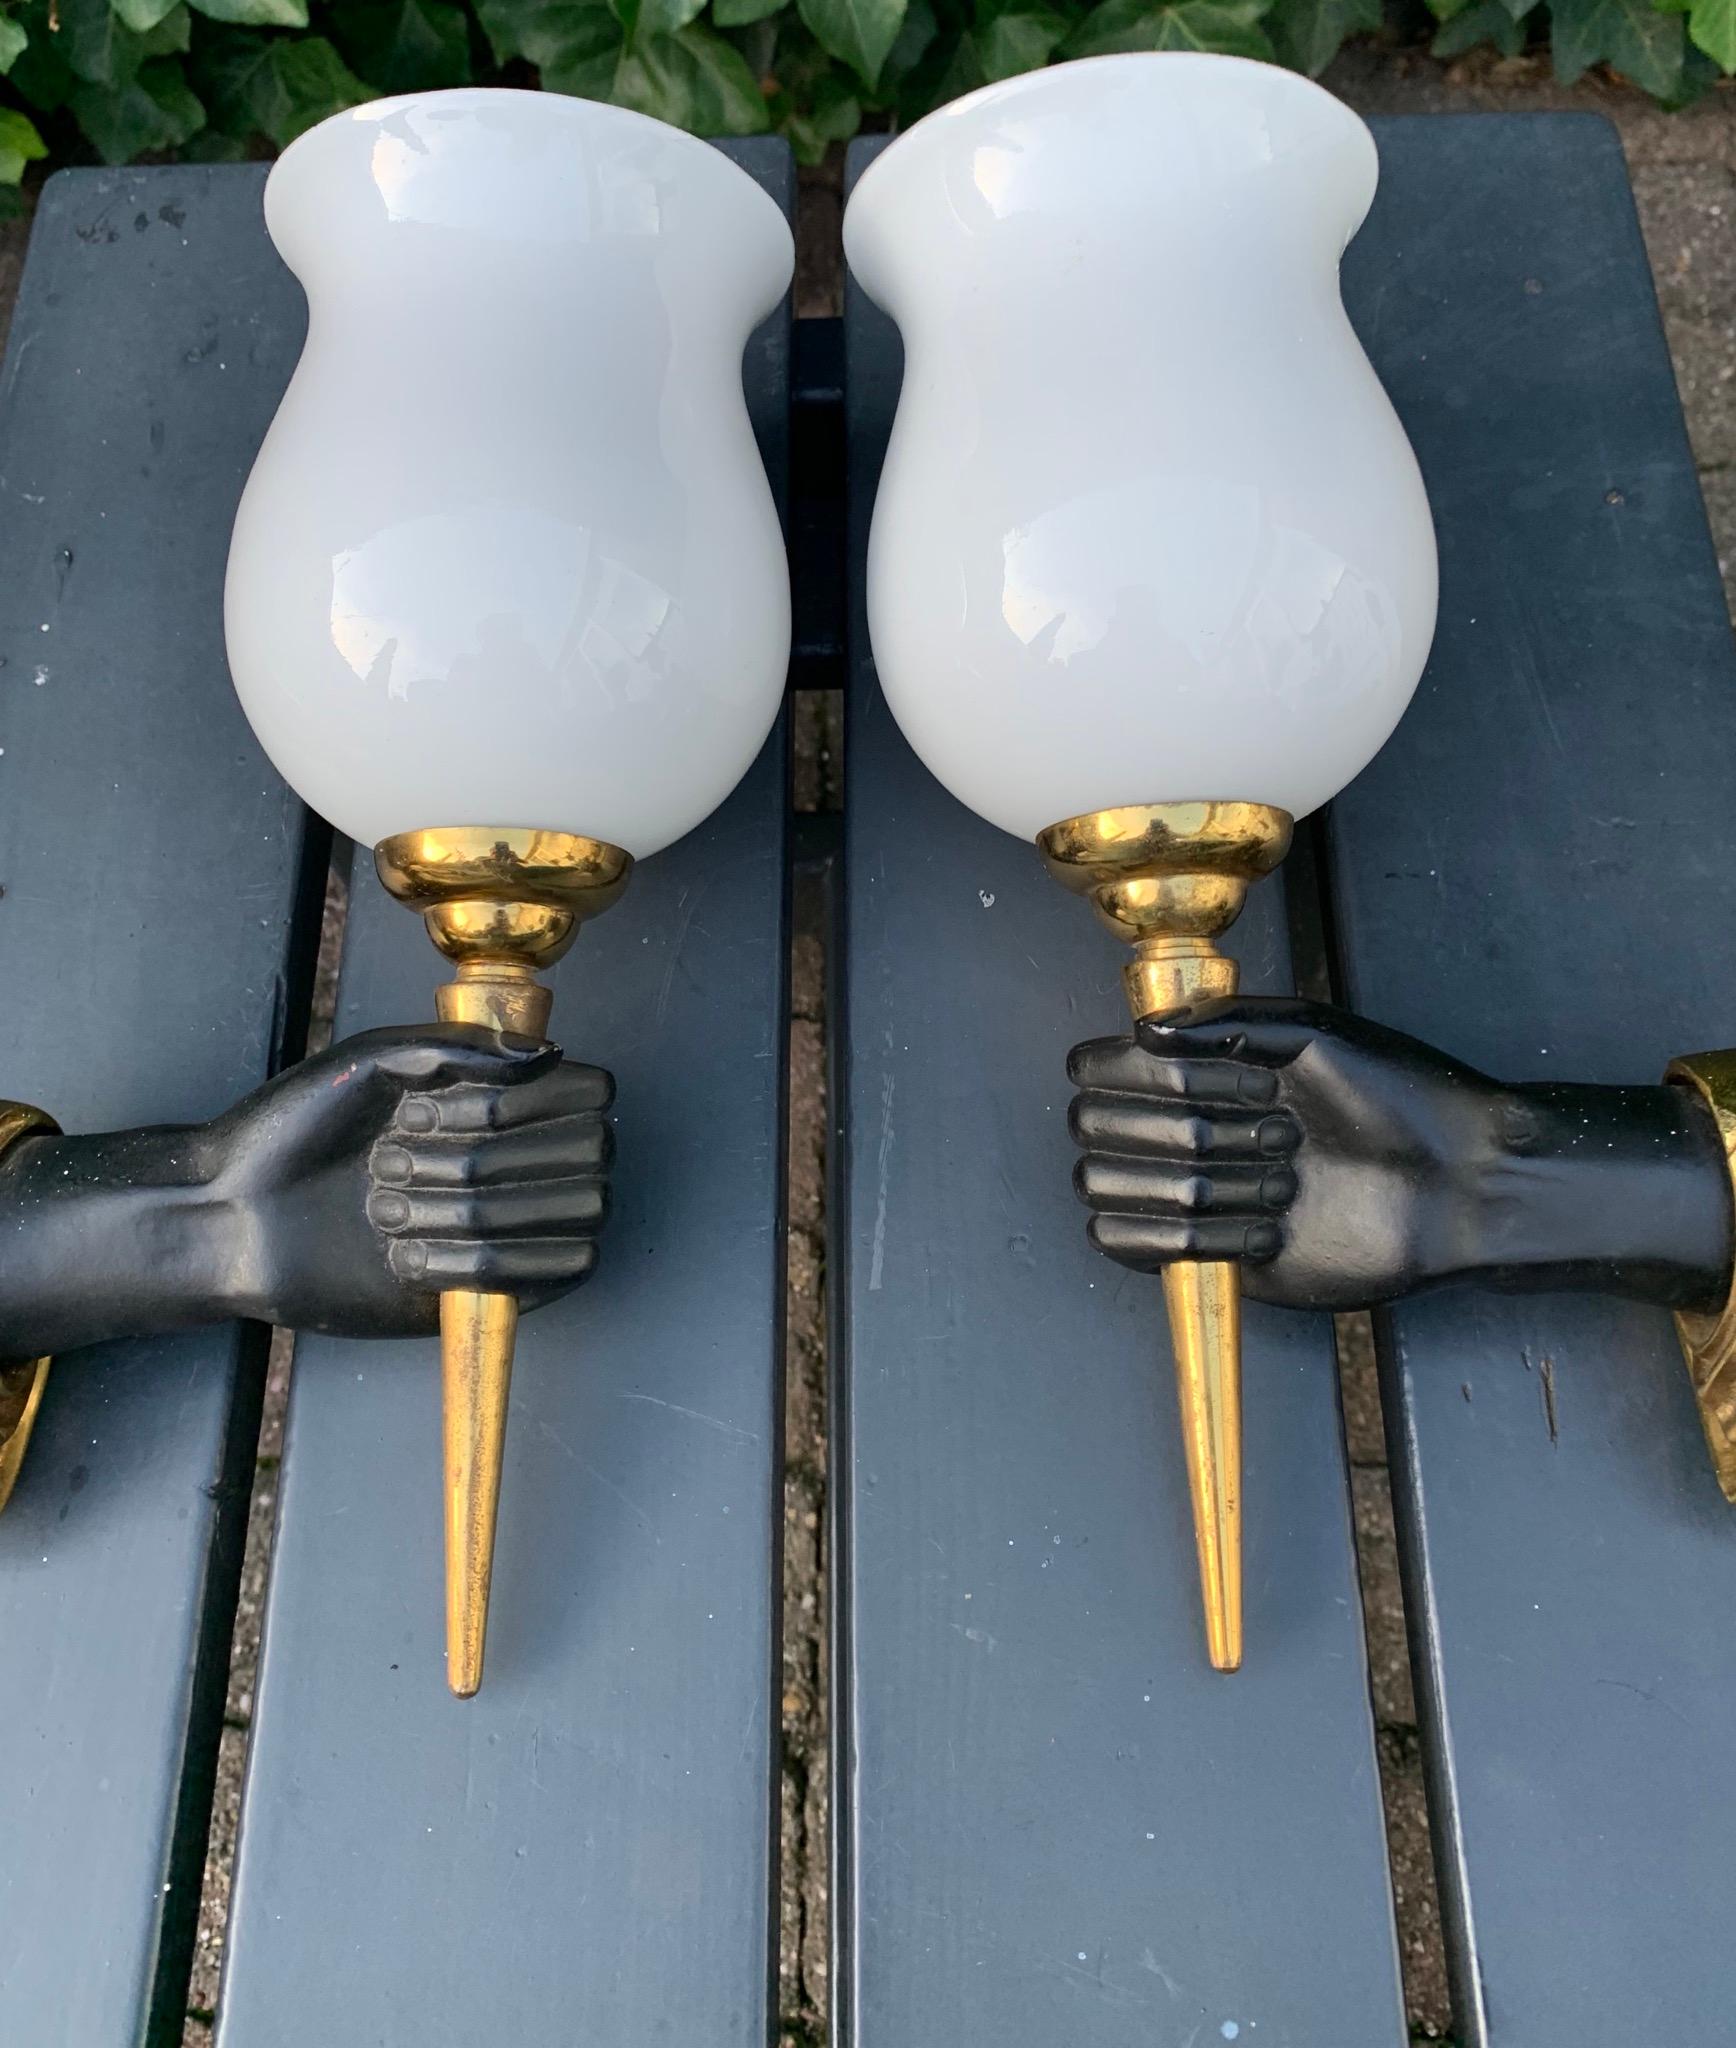 Midcentury hands - holding - torches wall lamps.

If you are looking for a small and decorative pair of wall sconces then look no further. These stylish and sought after, brass, bronze and iron wall sconces could make the perfect wall lights over